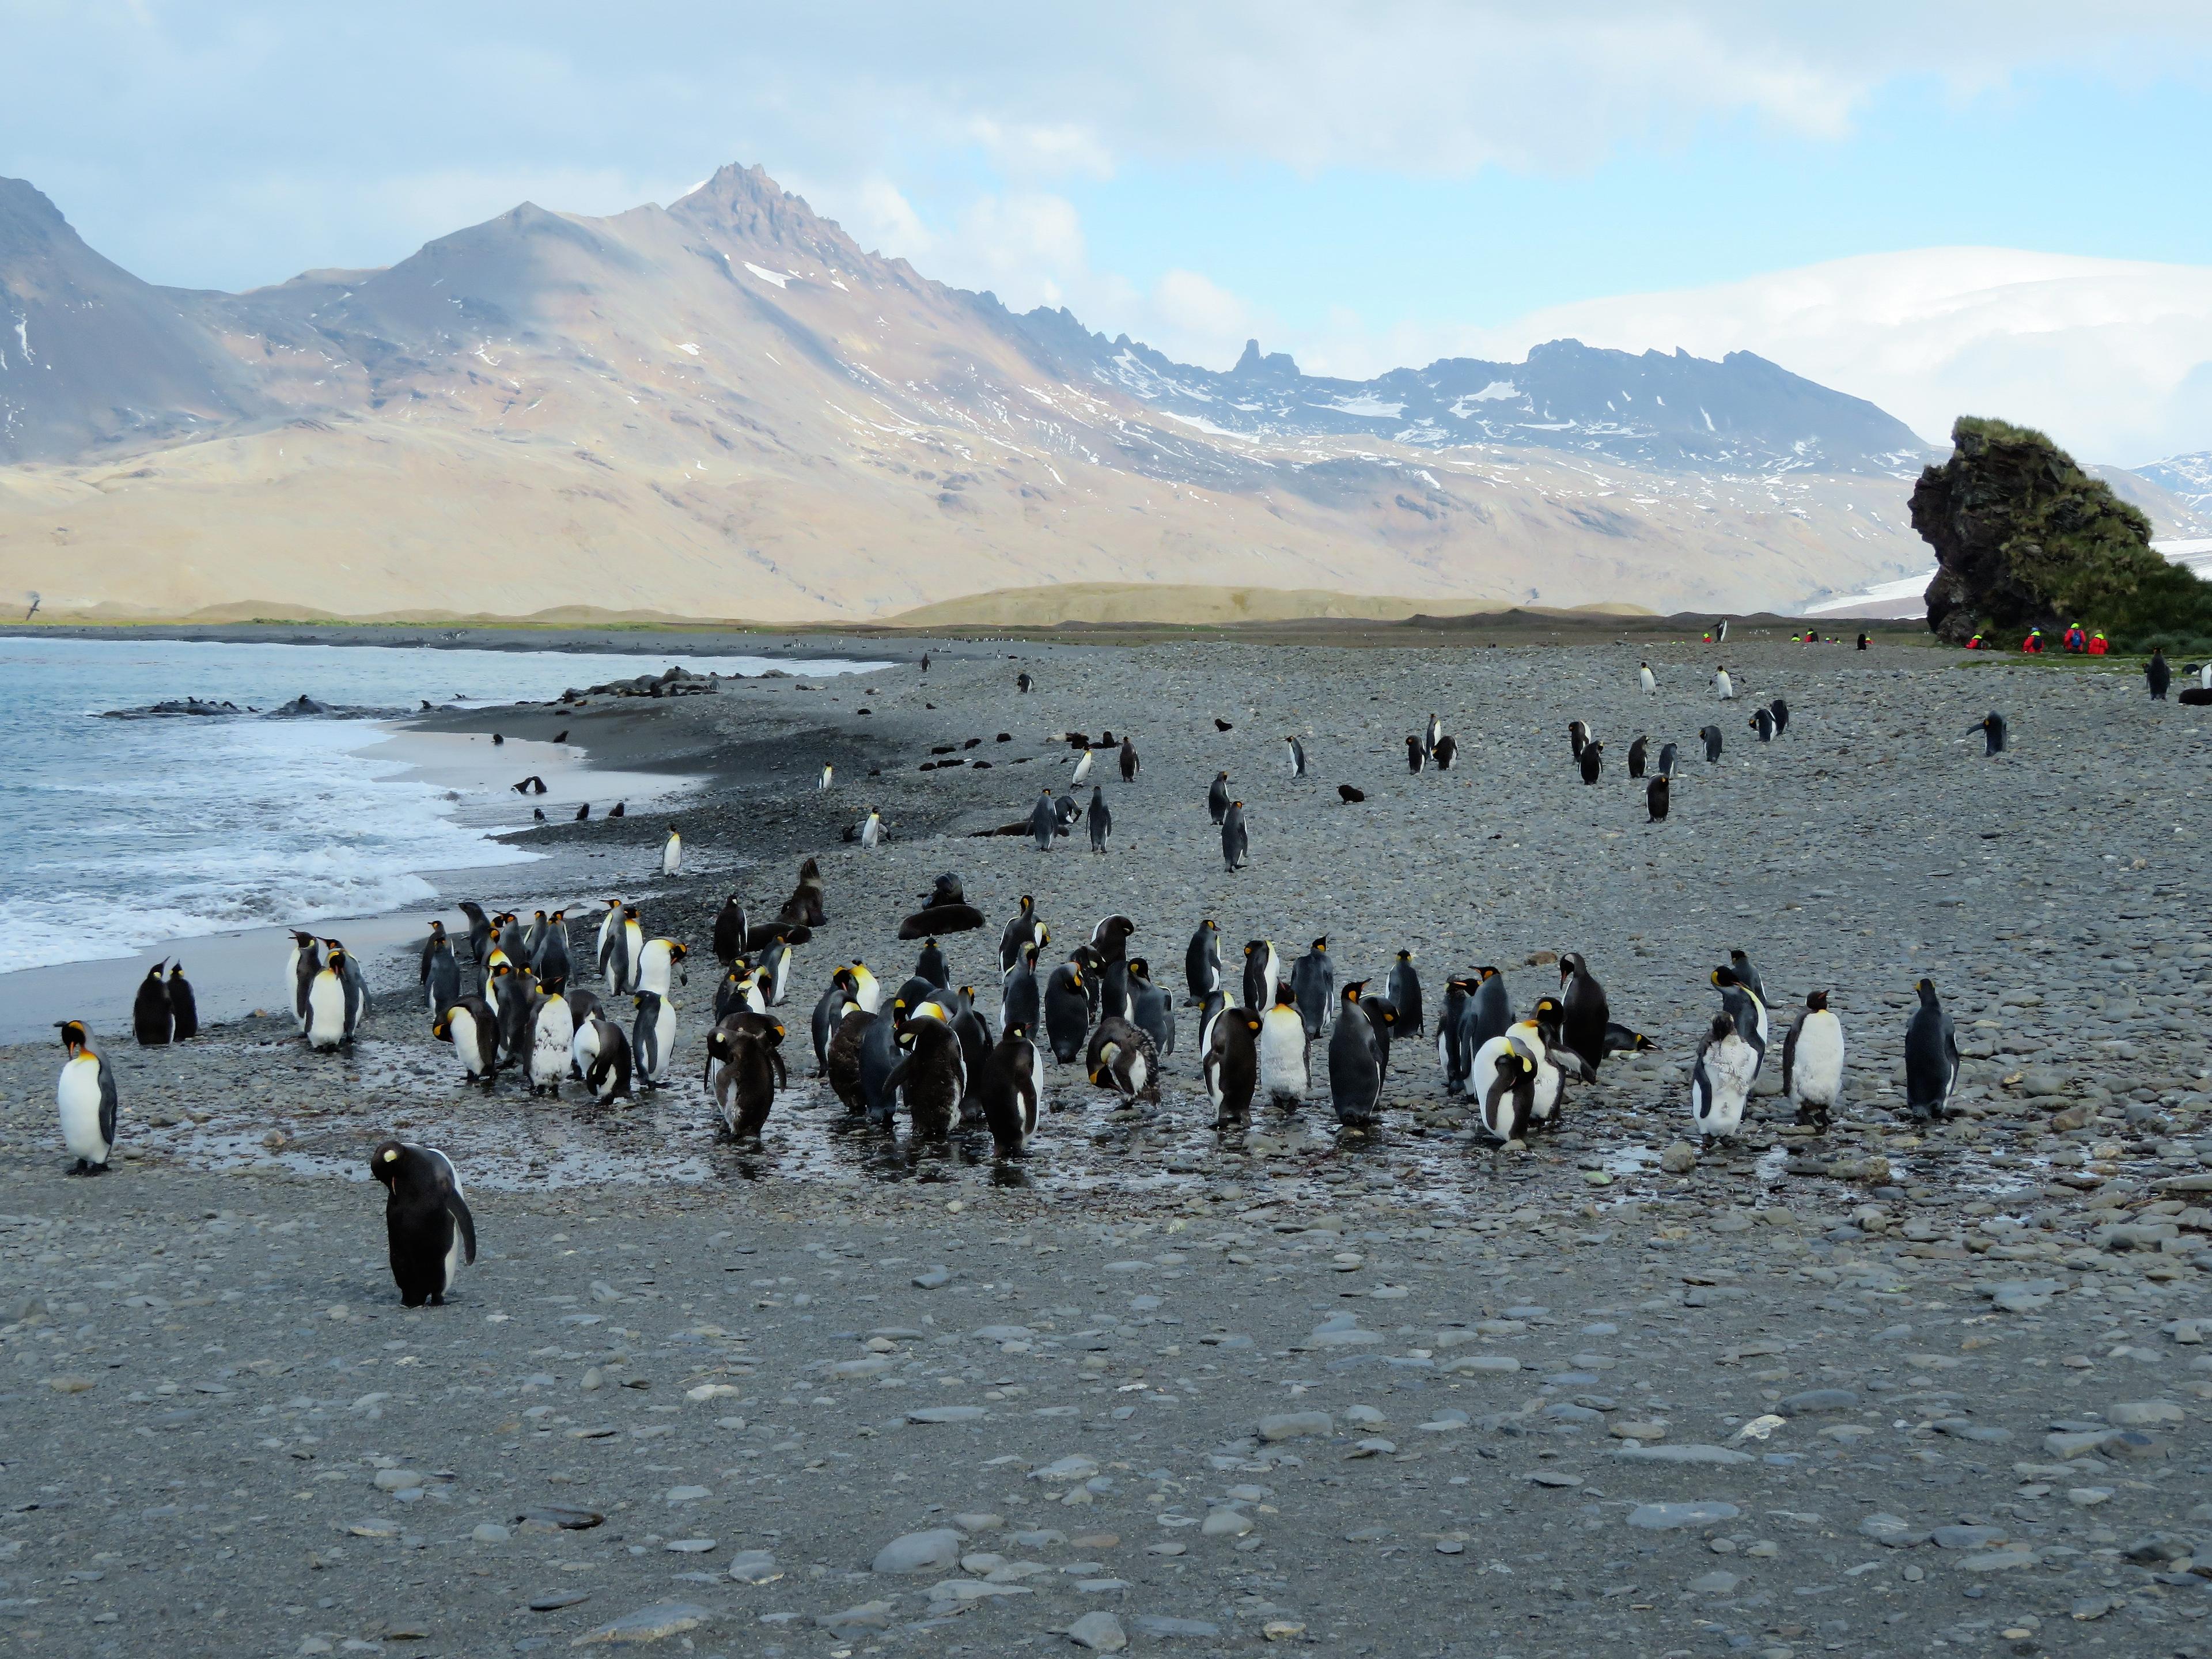 Expedition cruising emerges, from the holy grail - Antarctica to Panama and beyond - background banner